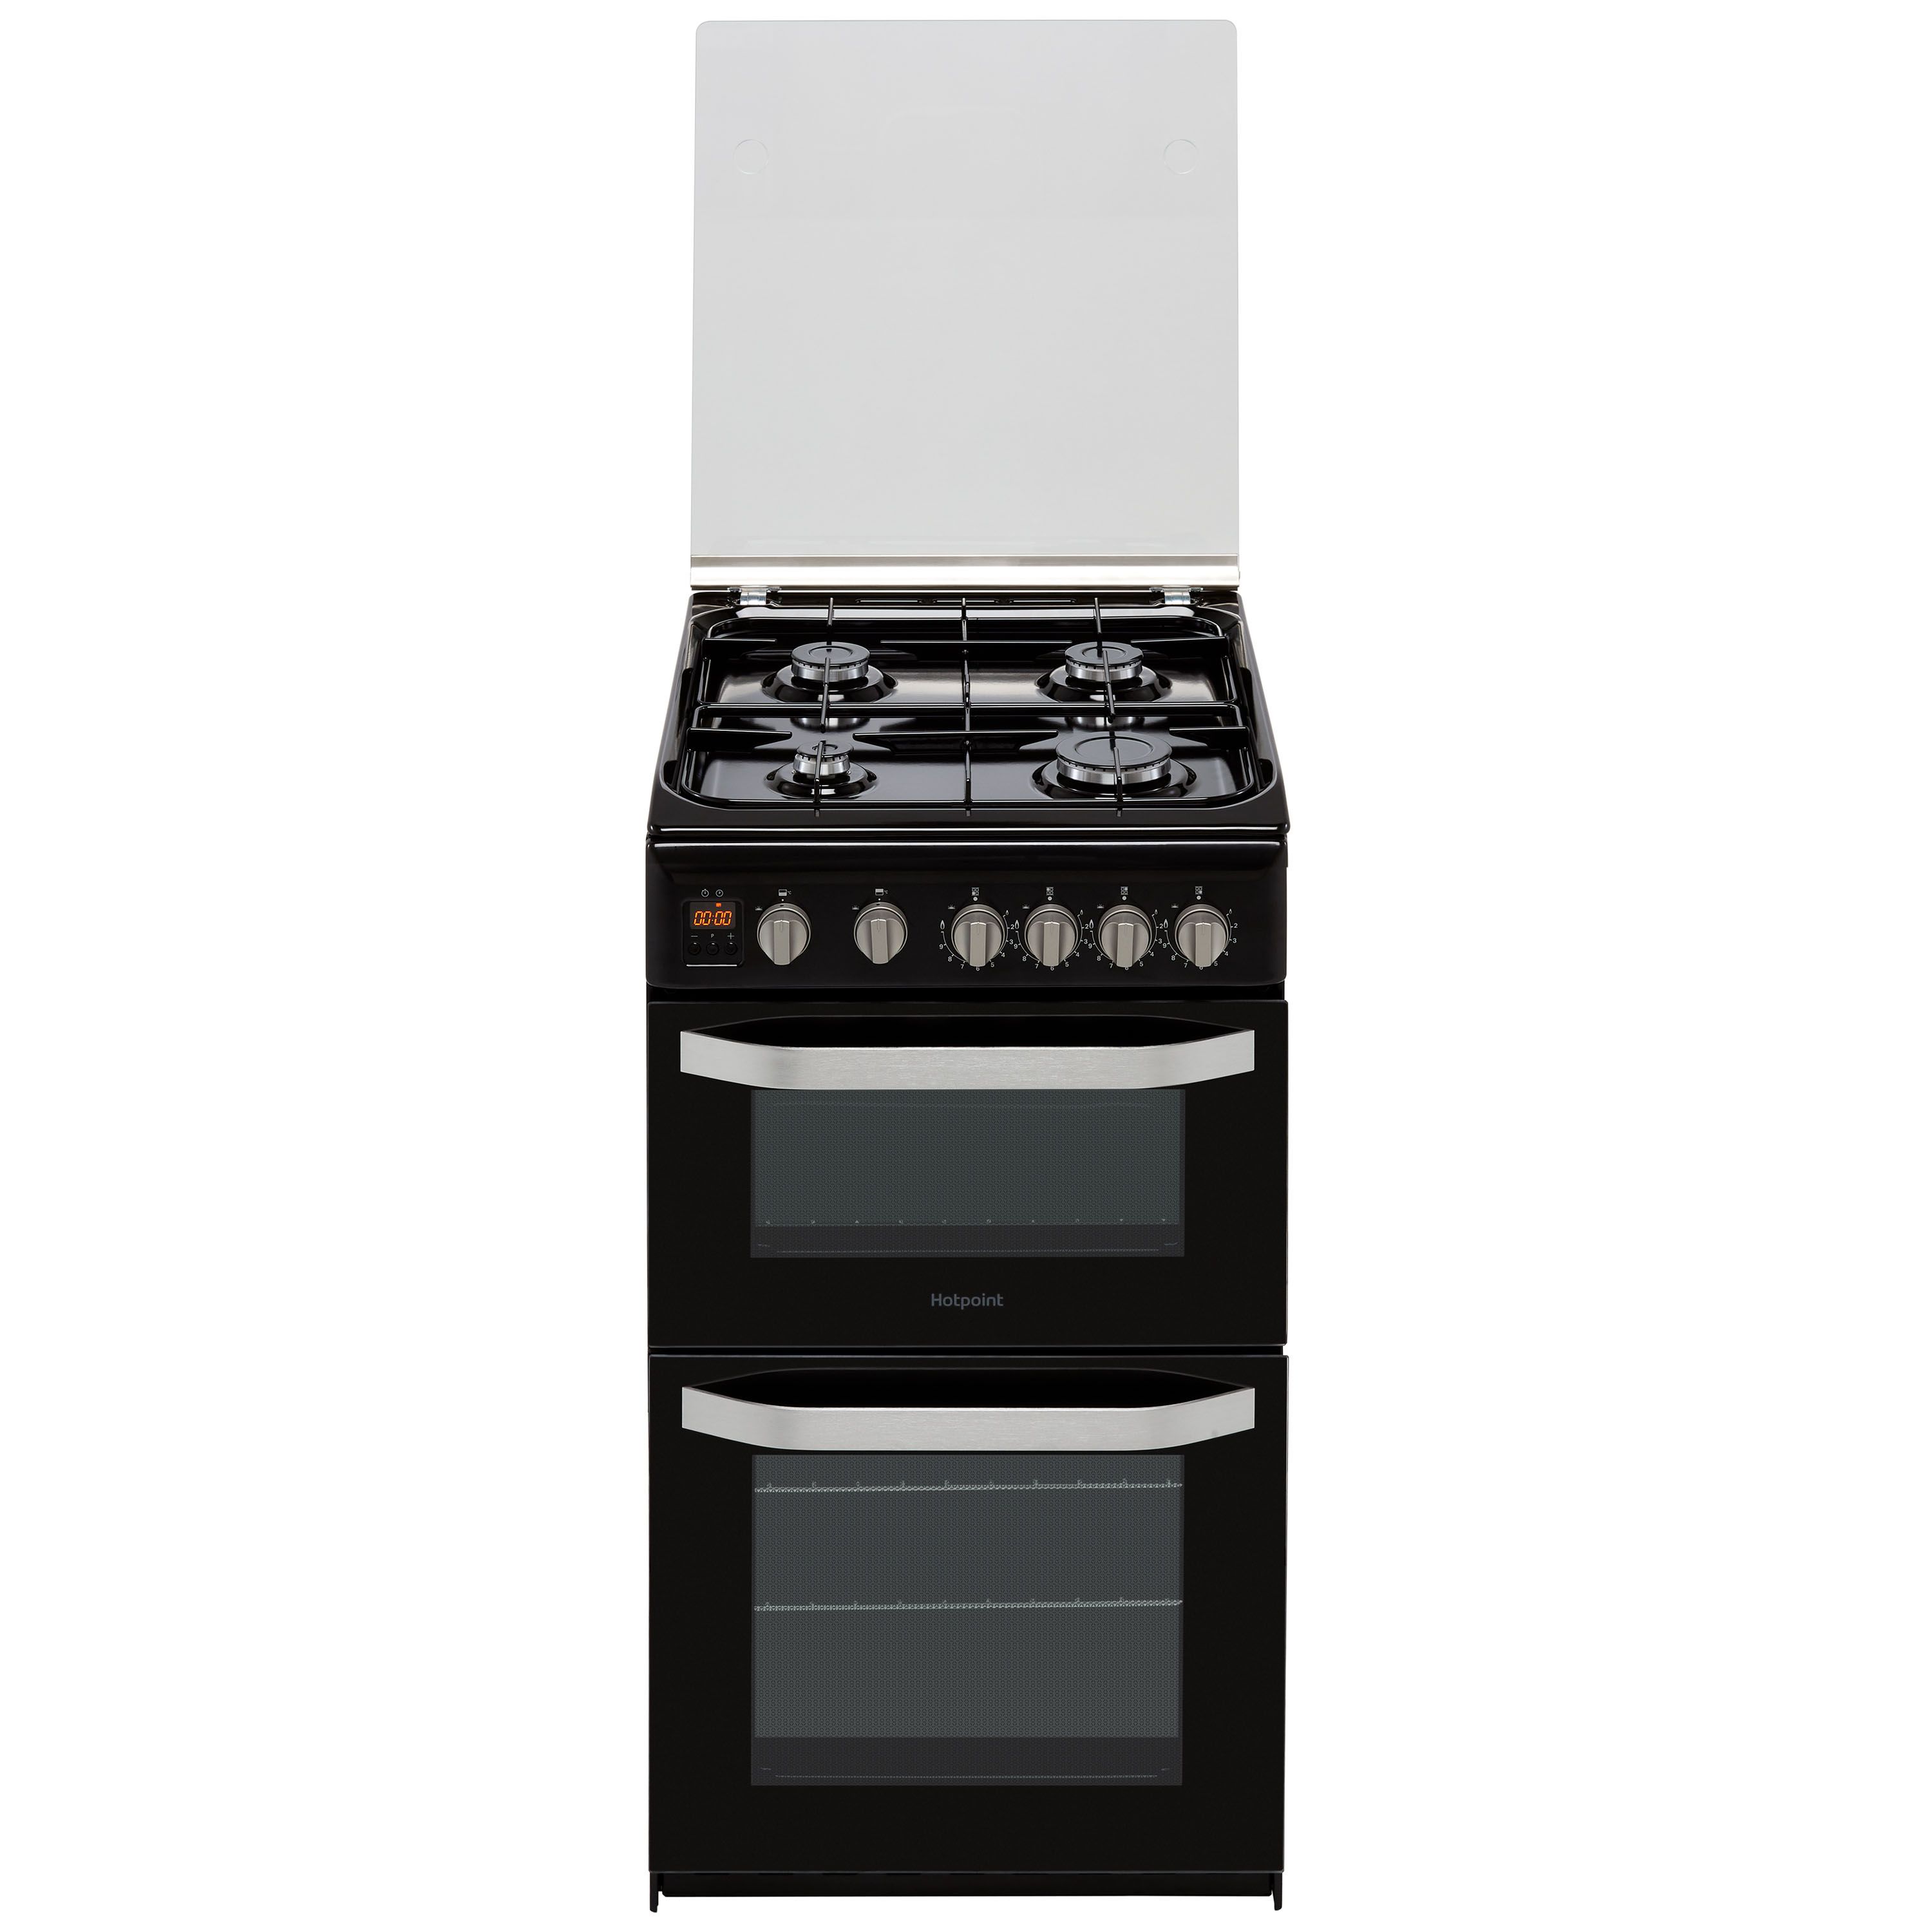 Hotpoint HD5G00CCBK/UK 50cm Double Gas Cooker with Gas Hob - Black